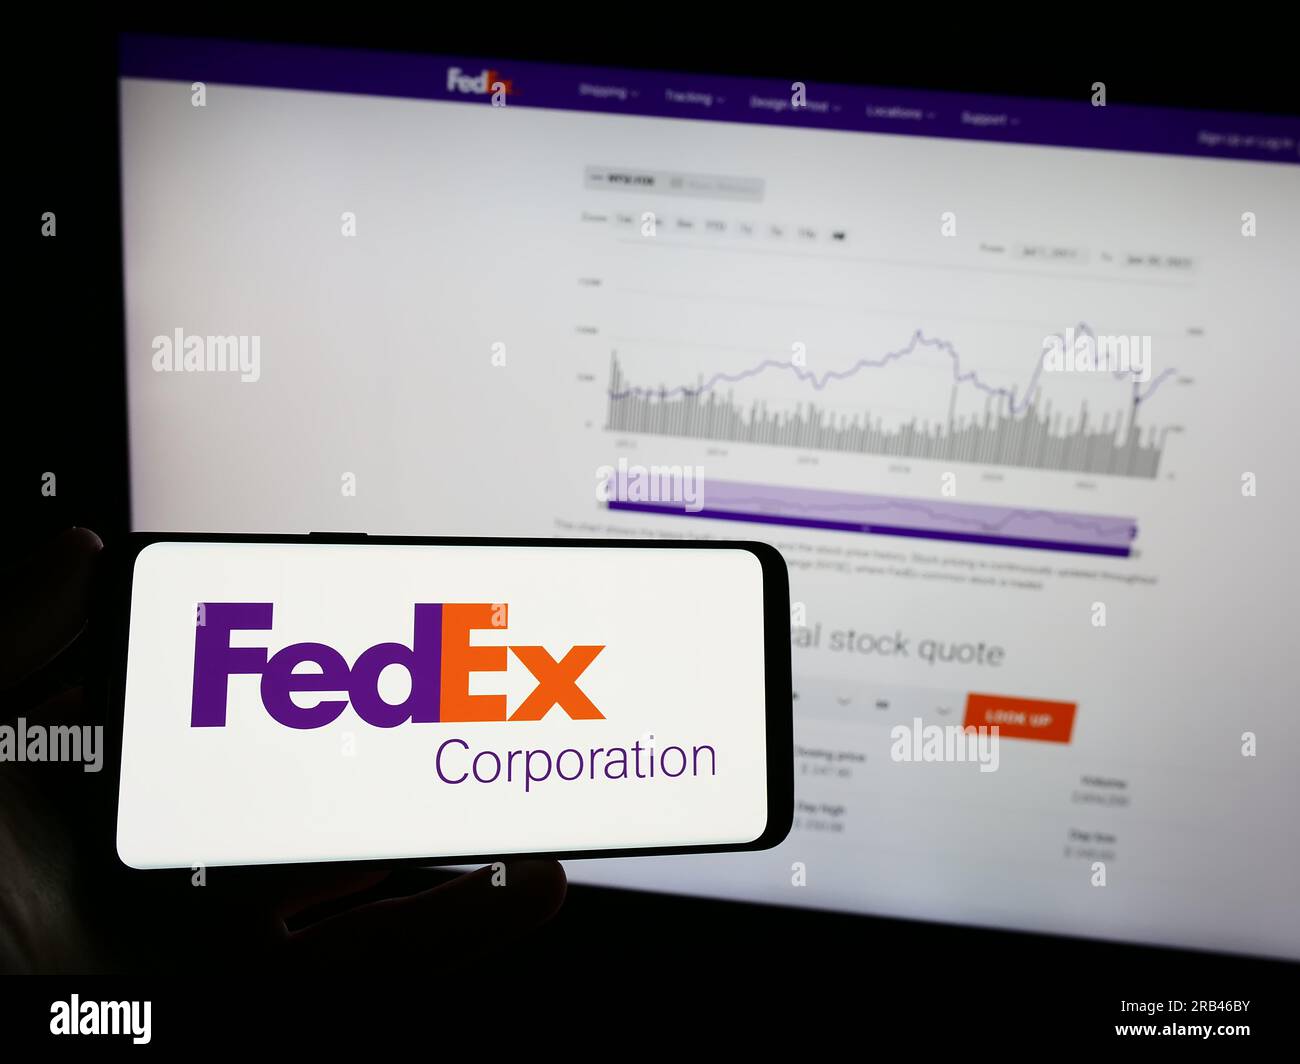 Person holding mobile phone with logo of American logistics company FedEx Corporation on screen in front of web page. Focus on phone display. Stock Photo